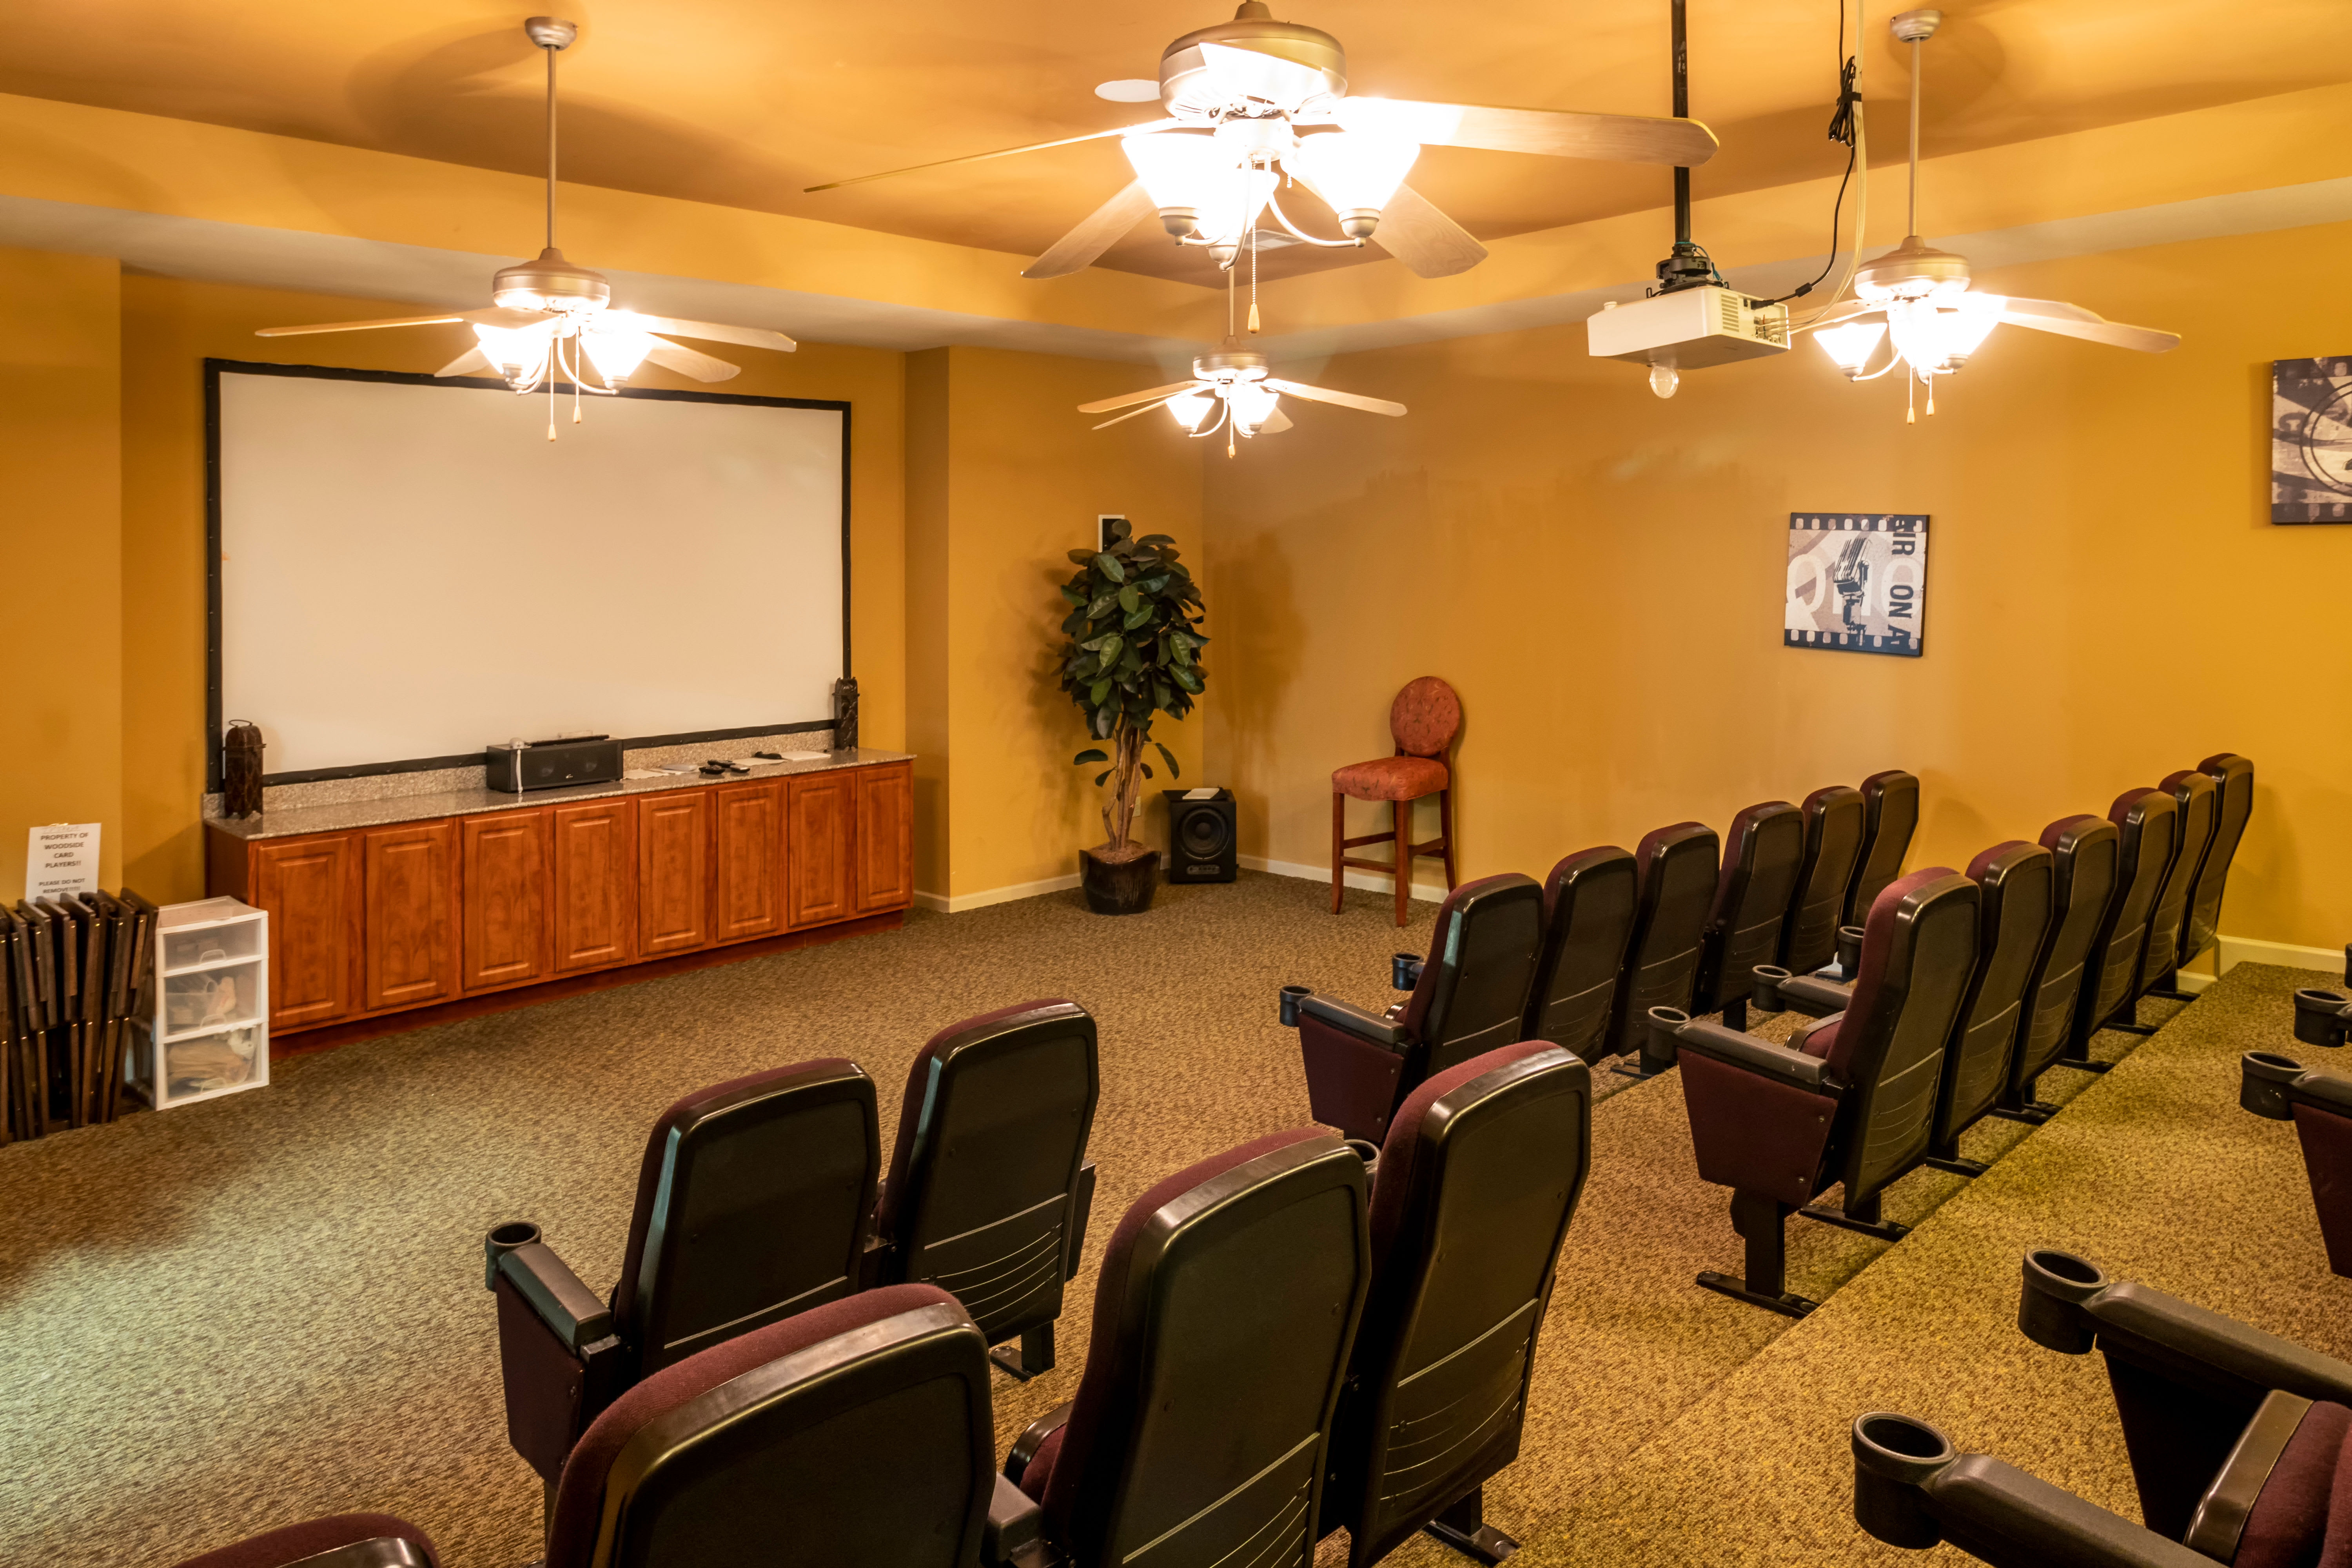 A community theater for movie nights at Woodside Manor in Conroe, Texas